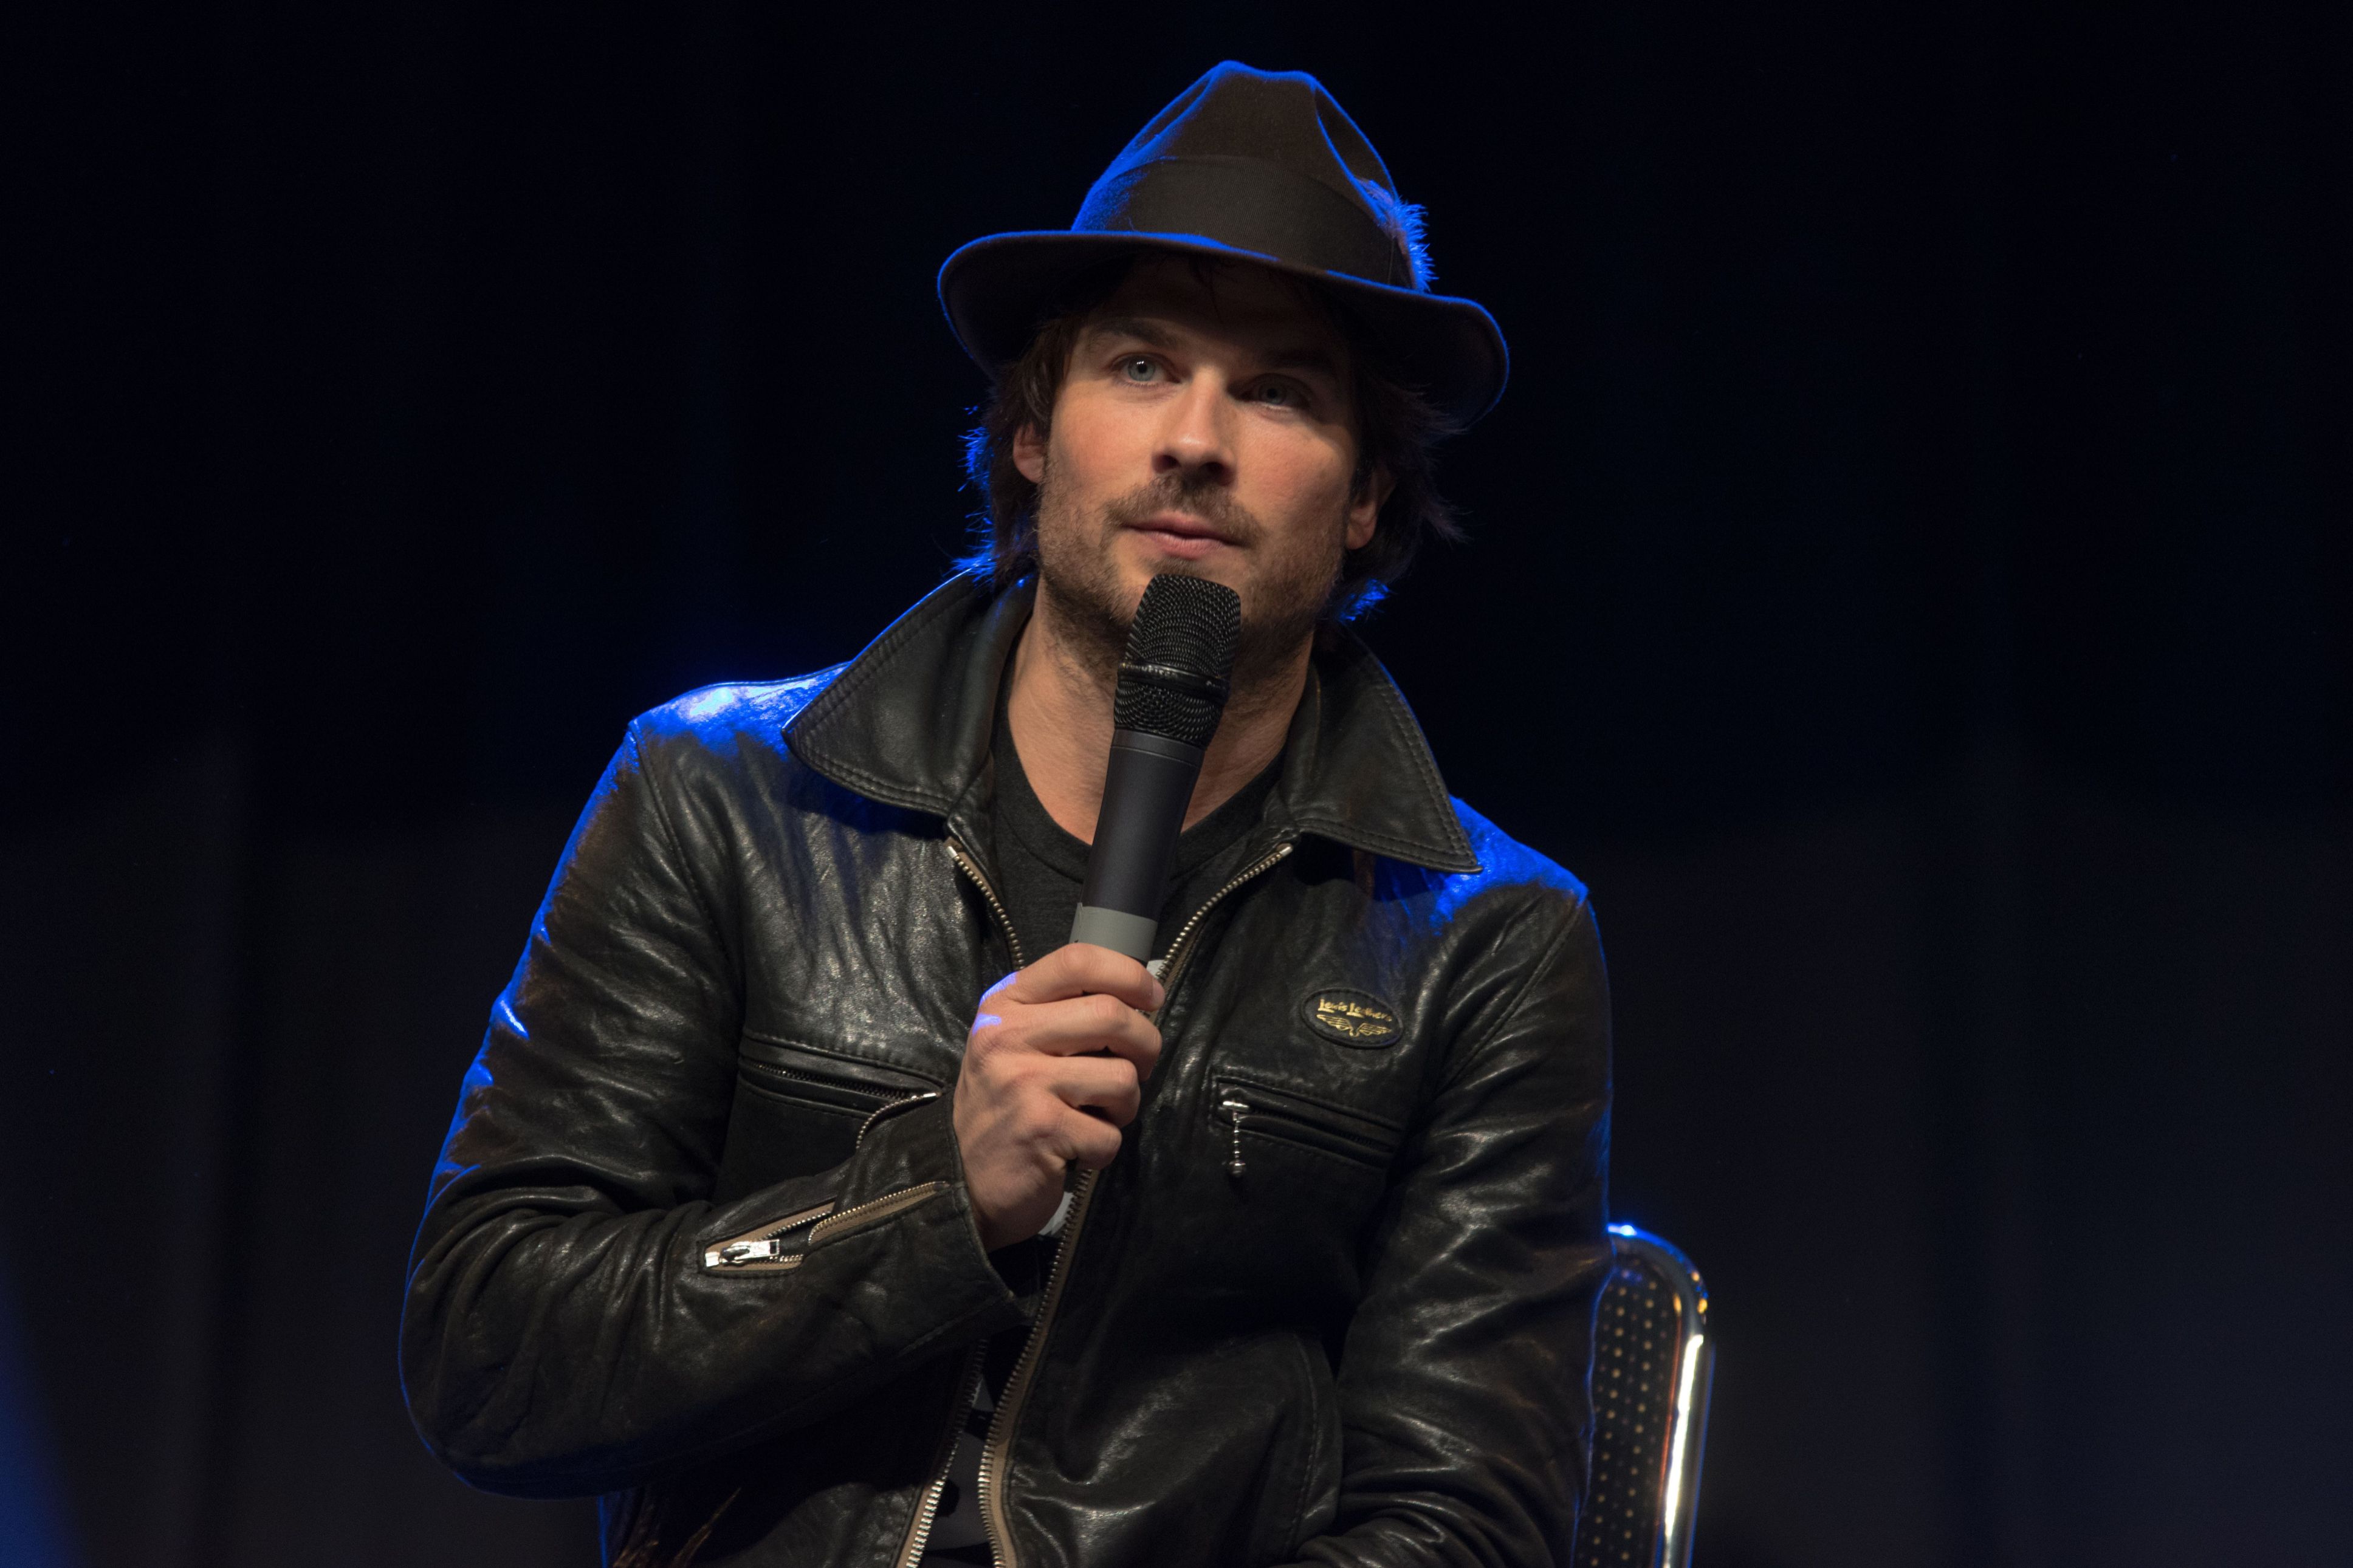 Ian Somerhalder in a leather jacket and hat.